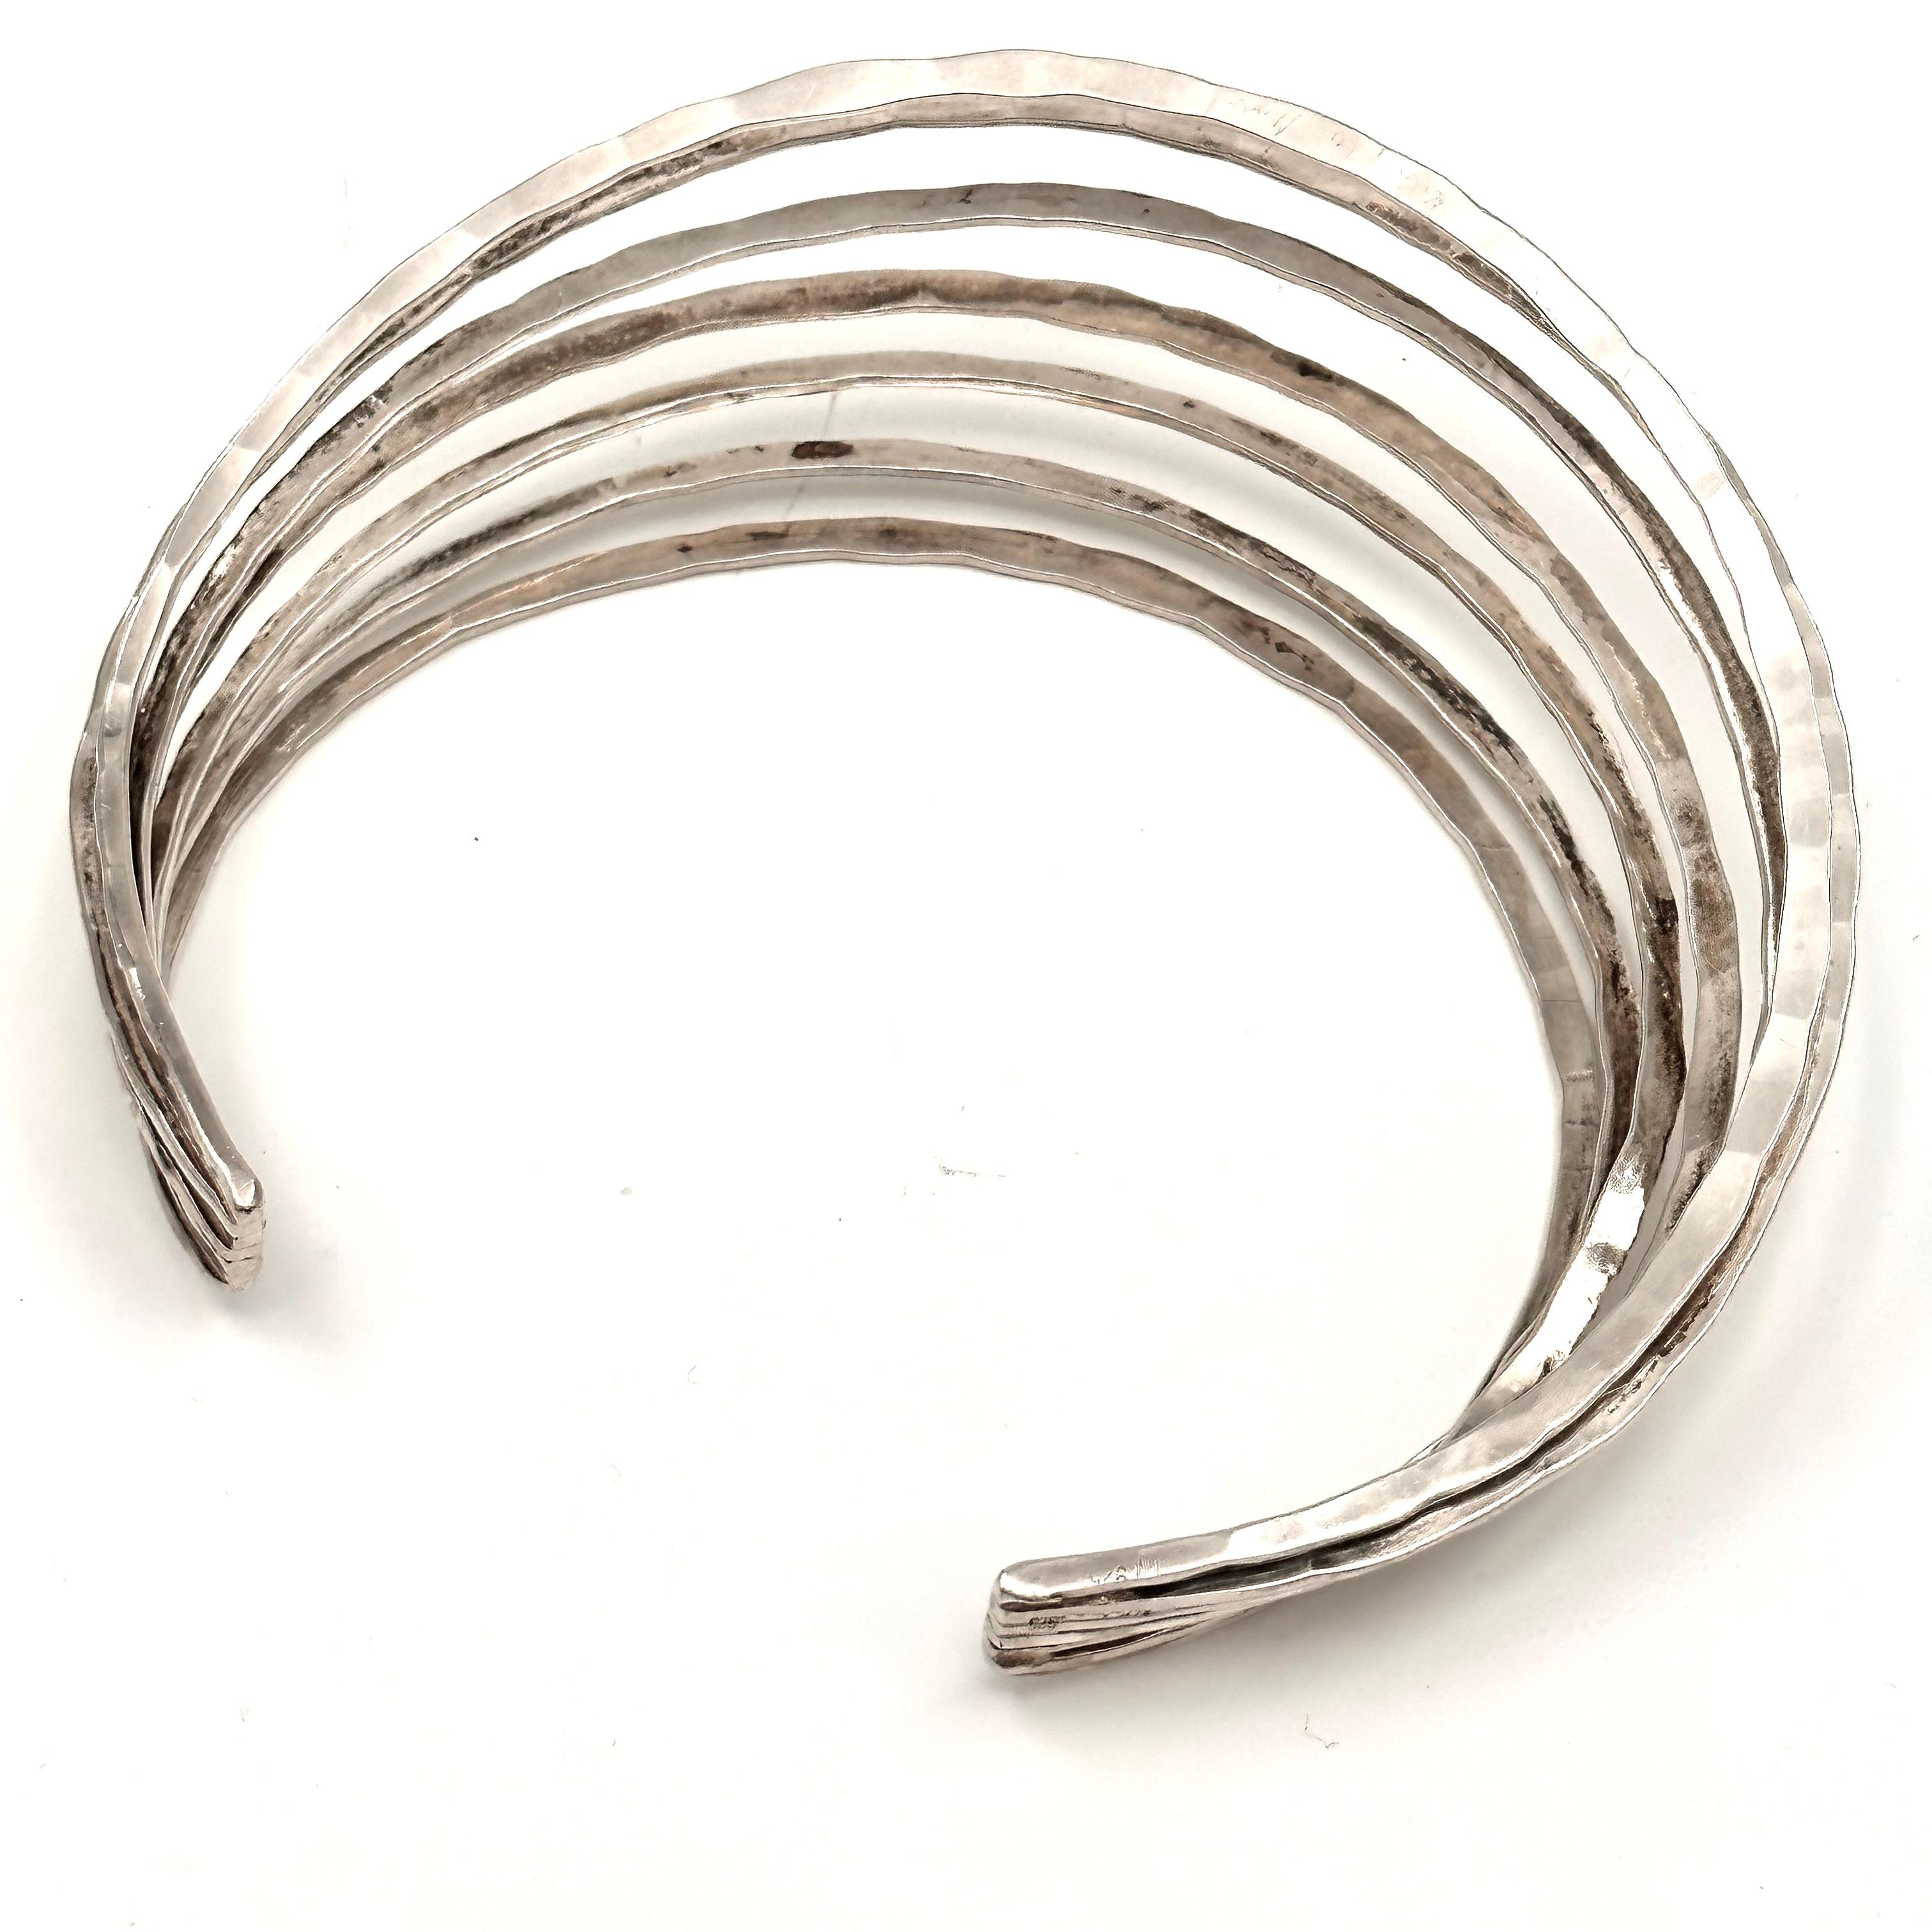 Forged sterling silver with all the gorgeous hammer marks, is what makes this impressive collar sparkle so. Robert Lee Morris is known for show stopping jewelry, whether on the runway or in the pages of fashion magazines. This handsome silver collar